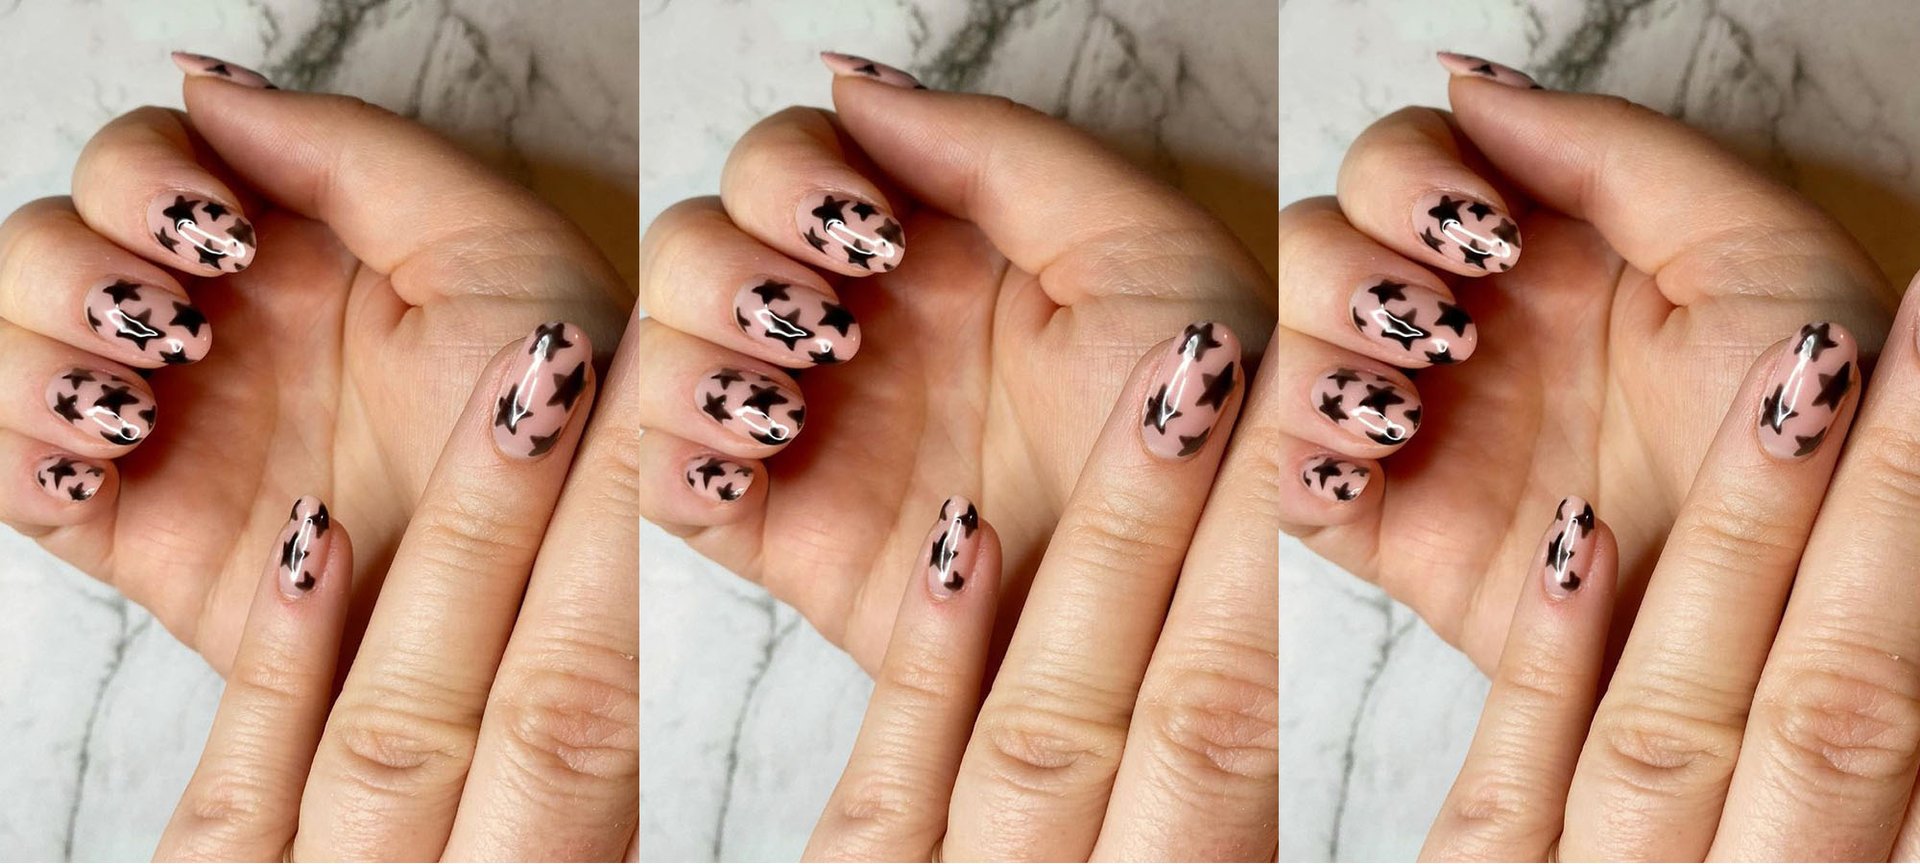 35+ Best Stranger Things Nail Designs and Ideas | Sarah Scoop